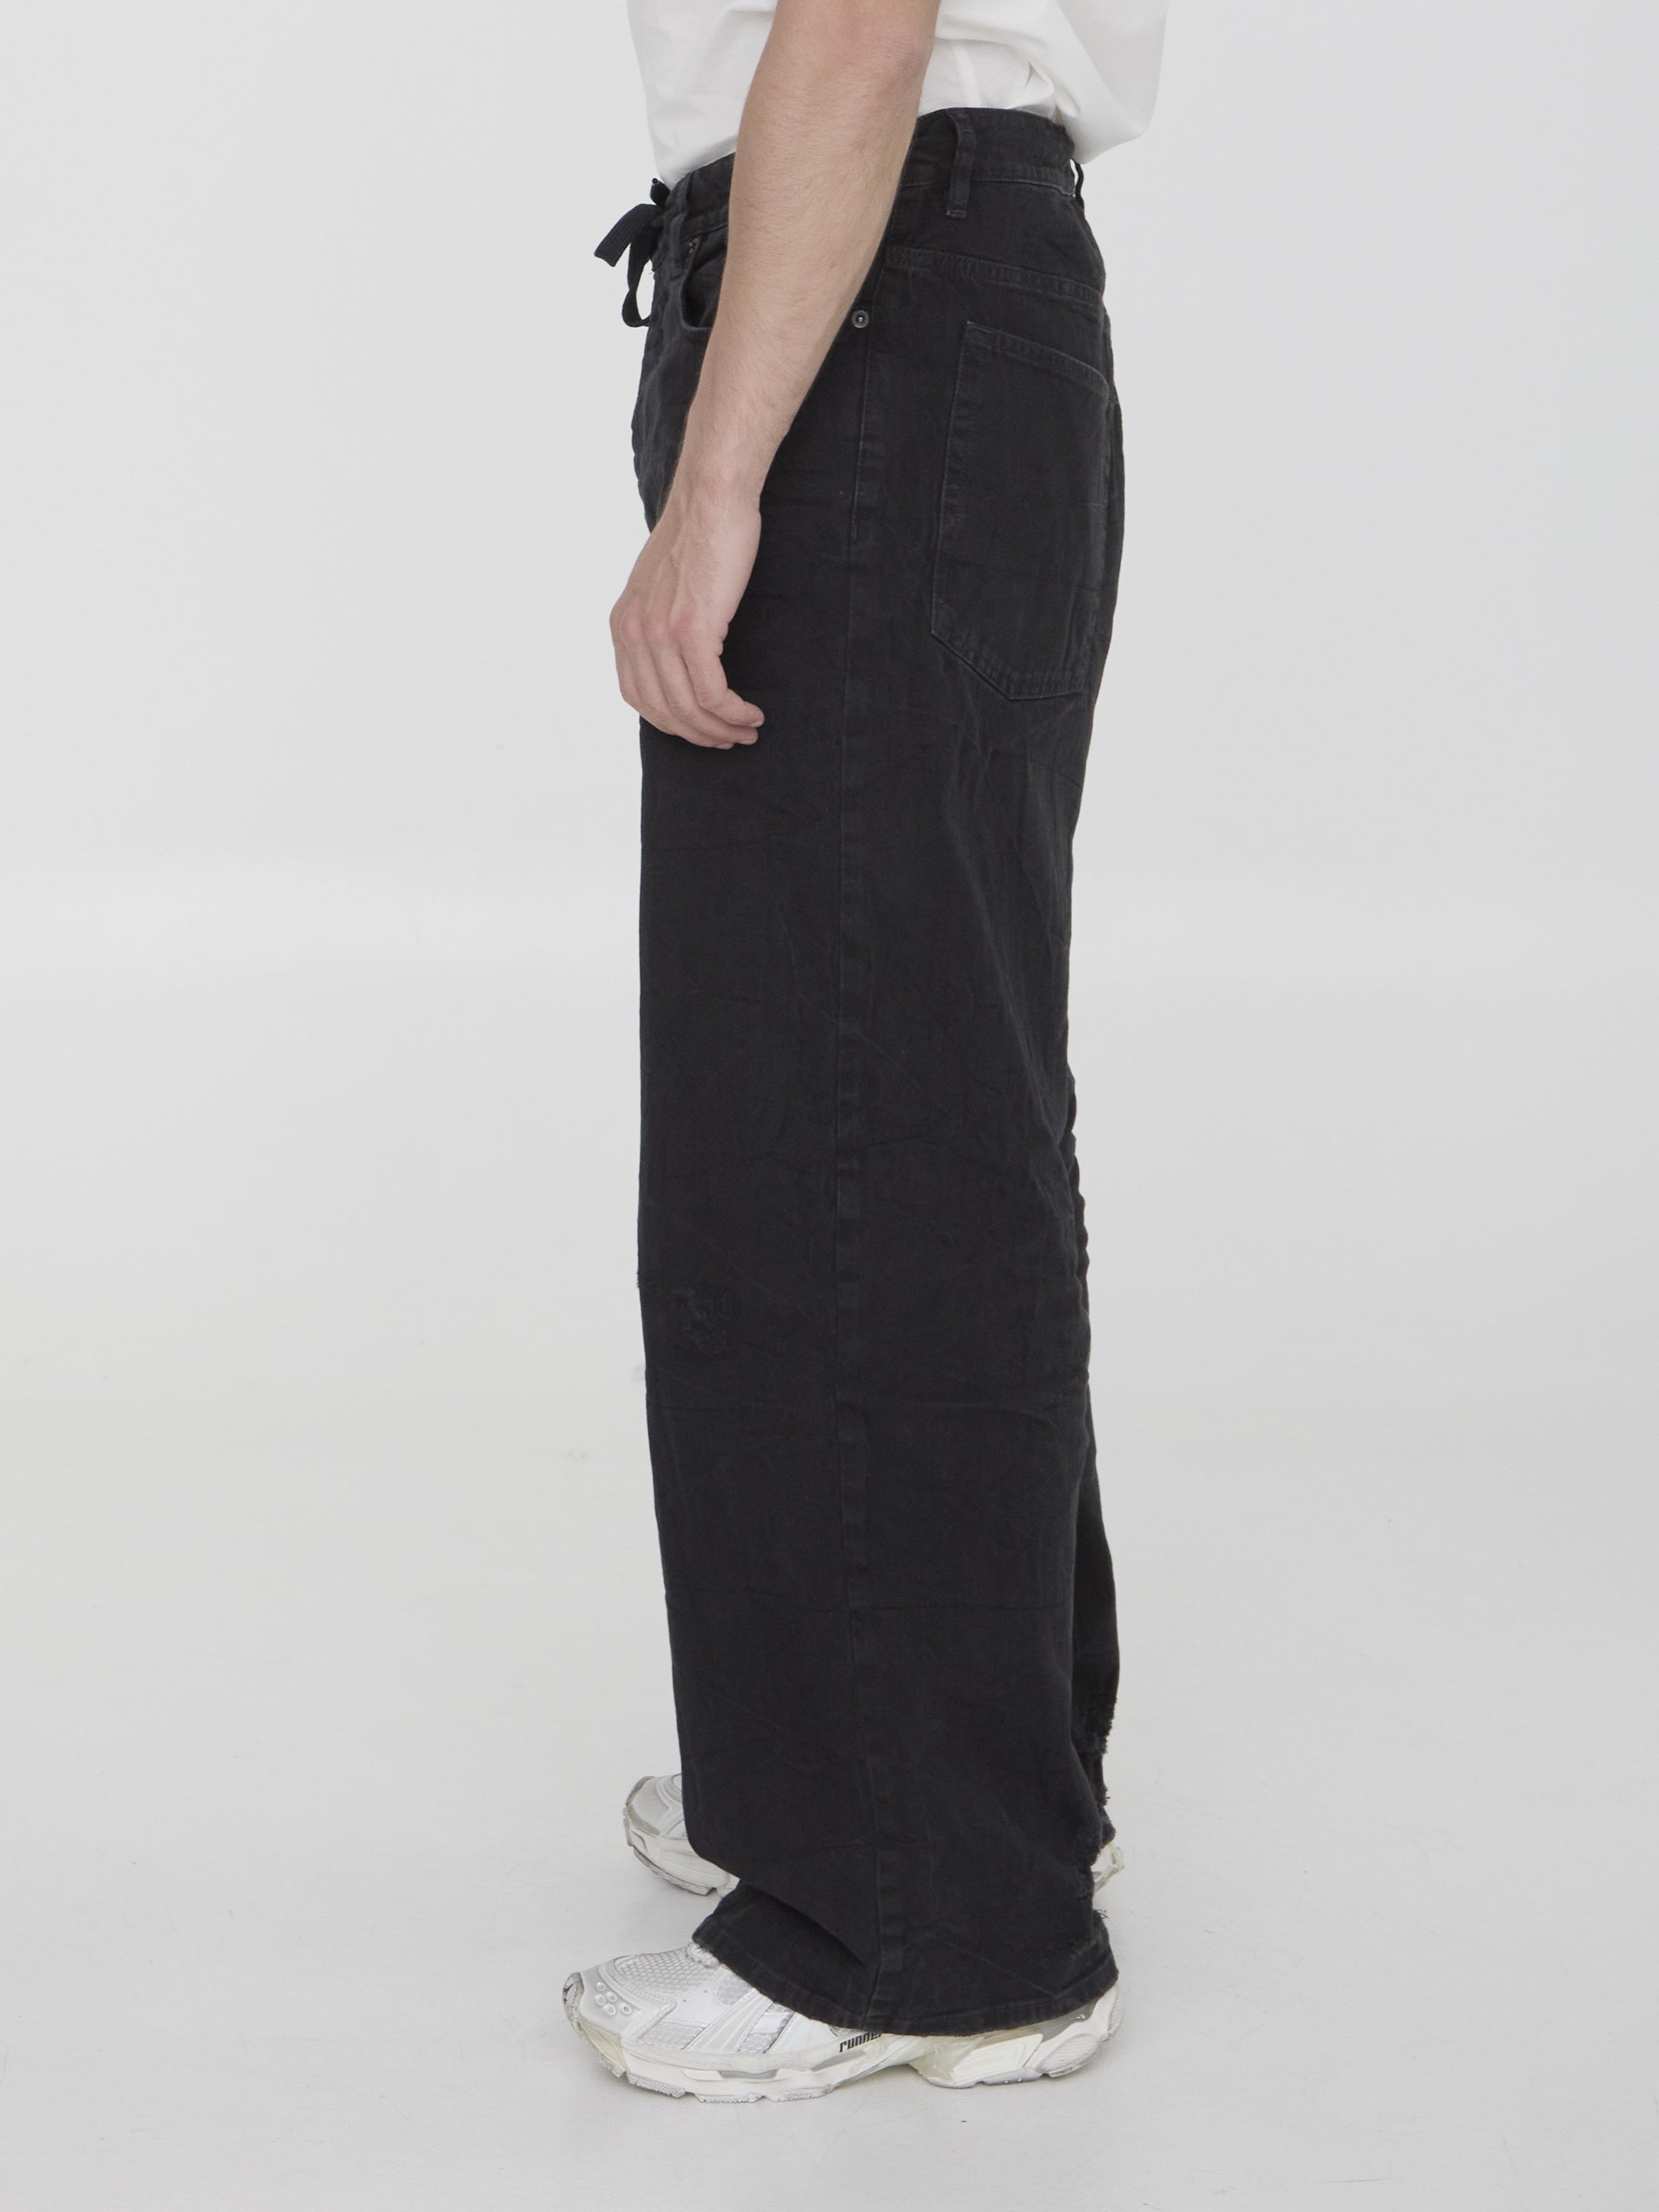 BALENCIAGA-OUTLET-SALE-Baggy-trousers-CLOTHING-S-BLACK-ARCHIVE-COLLECTION-3.jpg